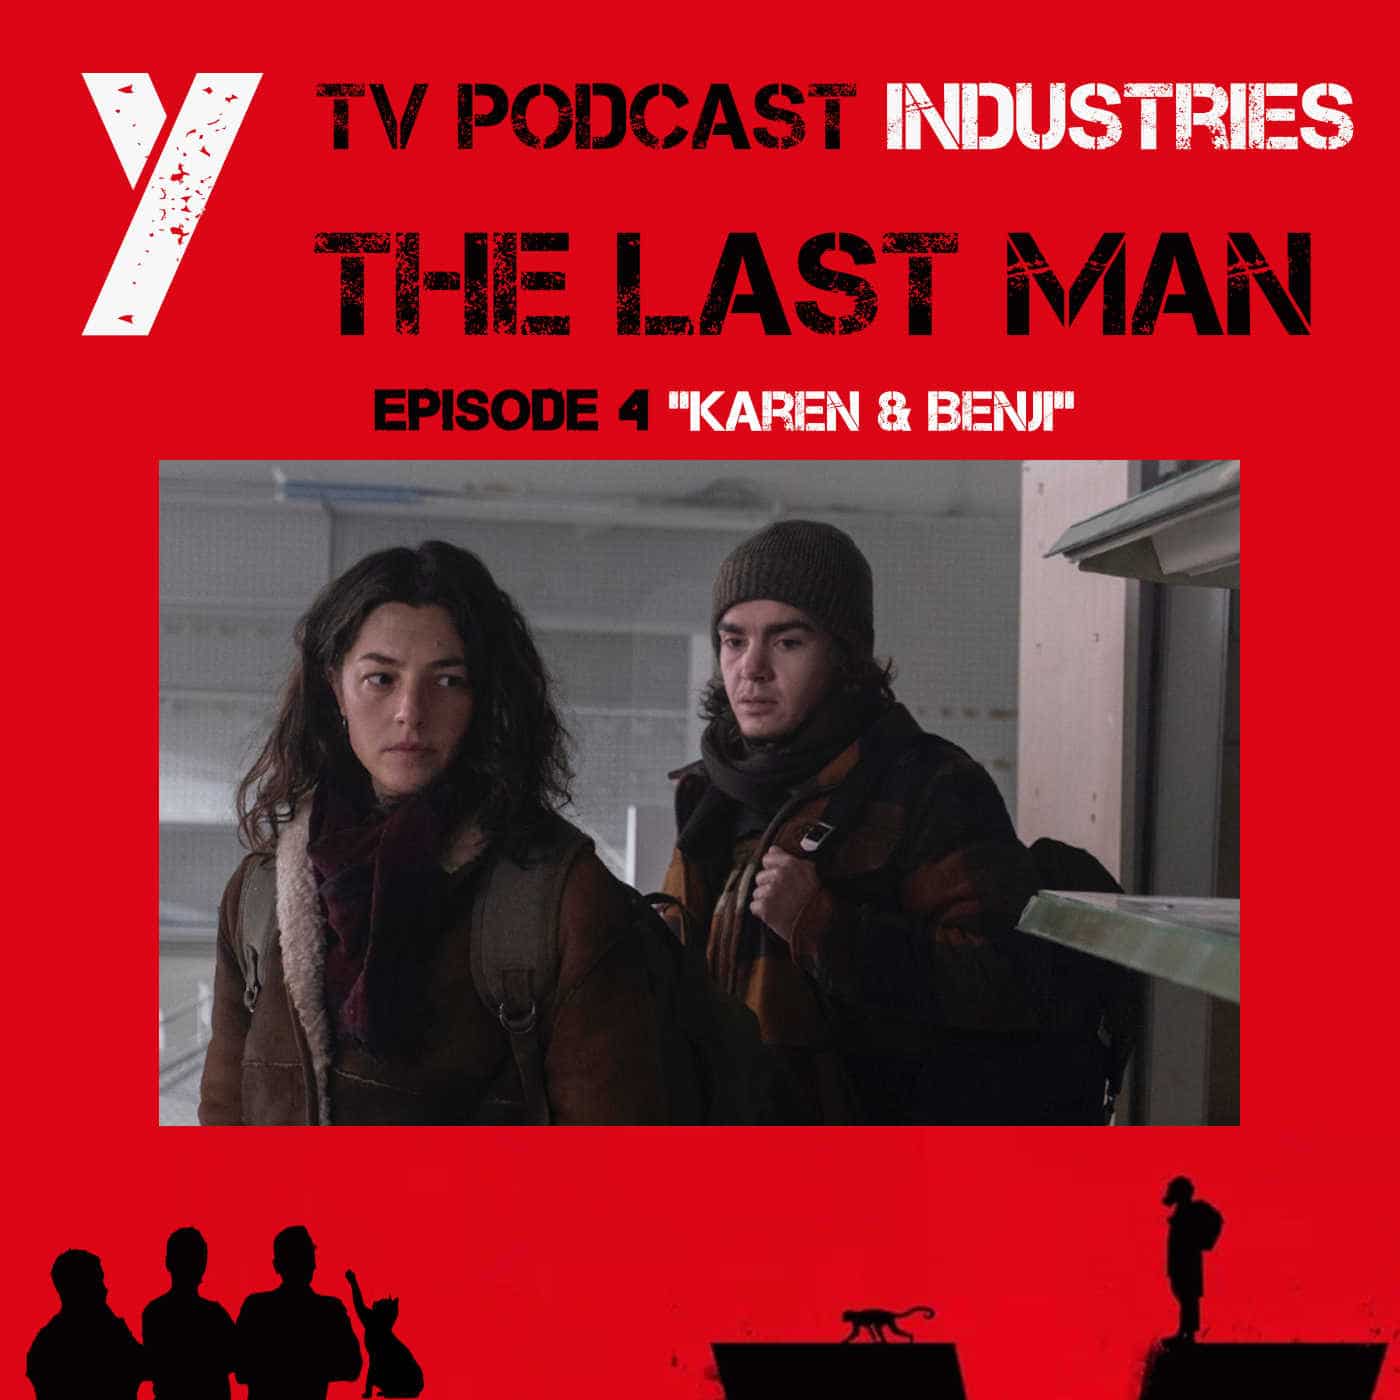 Y The Last Man Episode 4 "Karen and Benji" Podcast on TV Podcast Industries